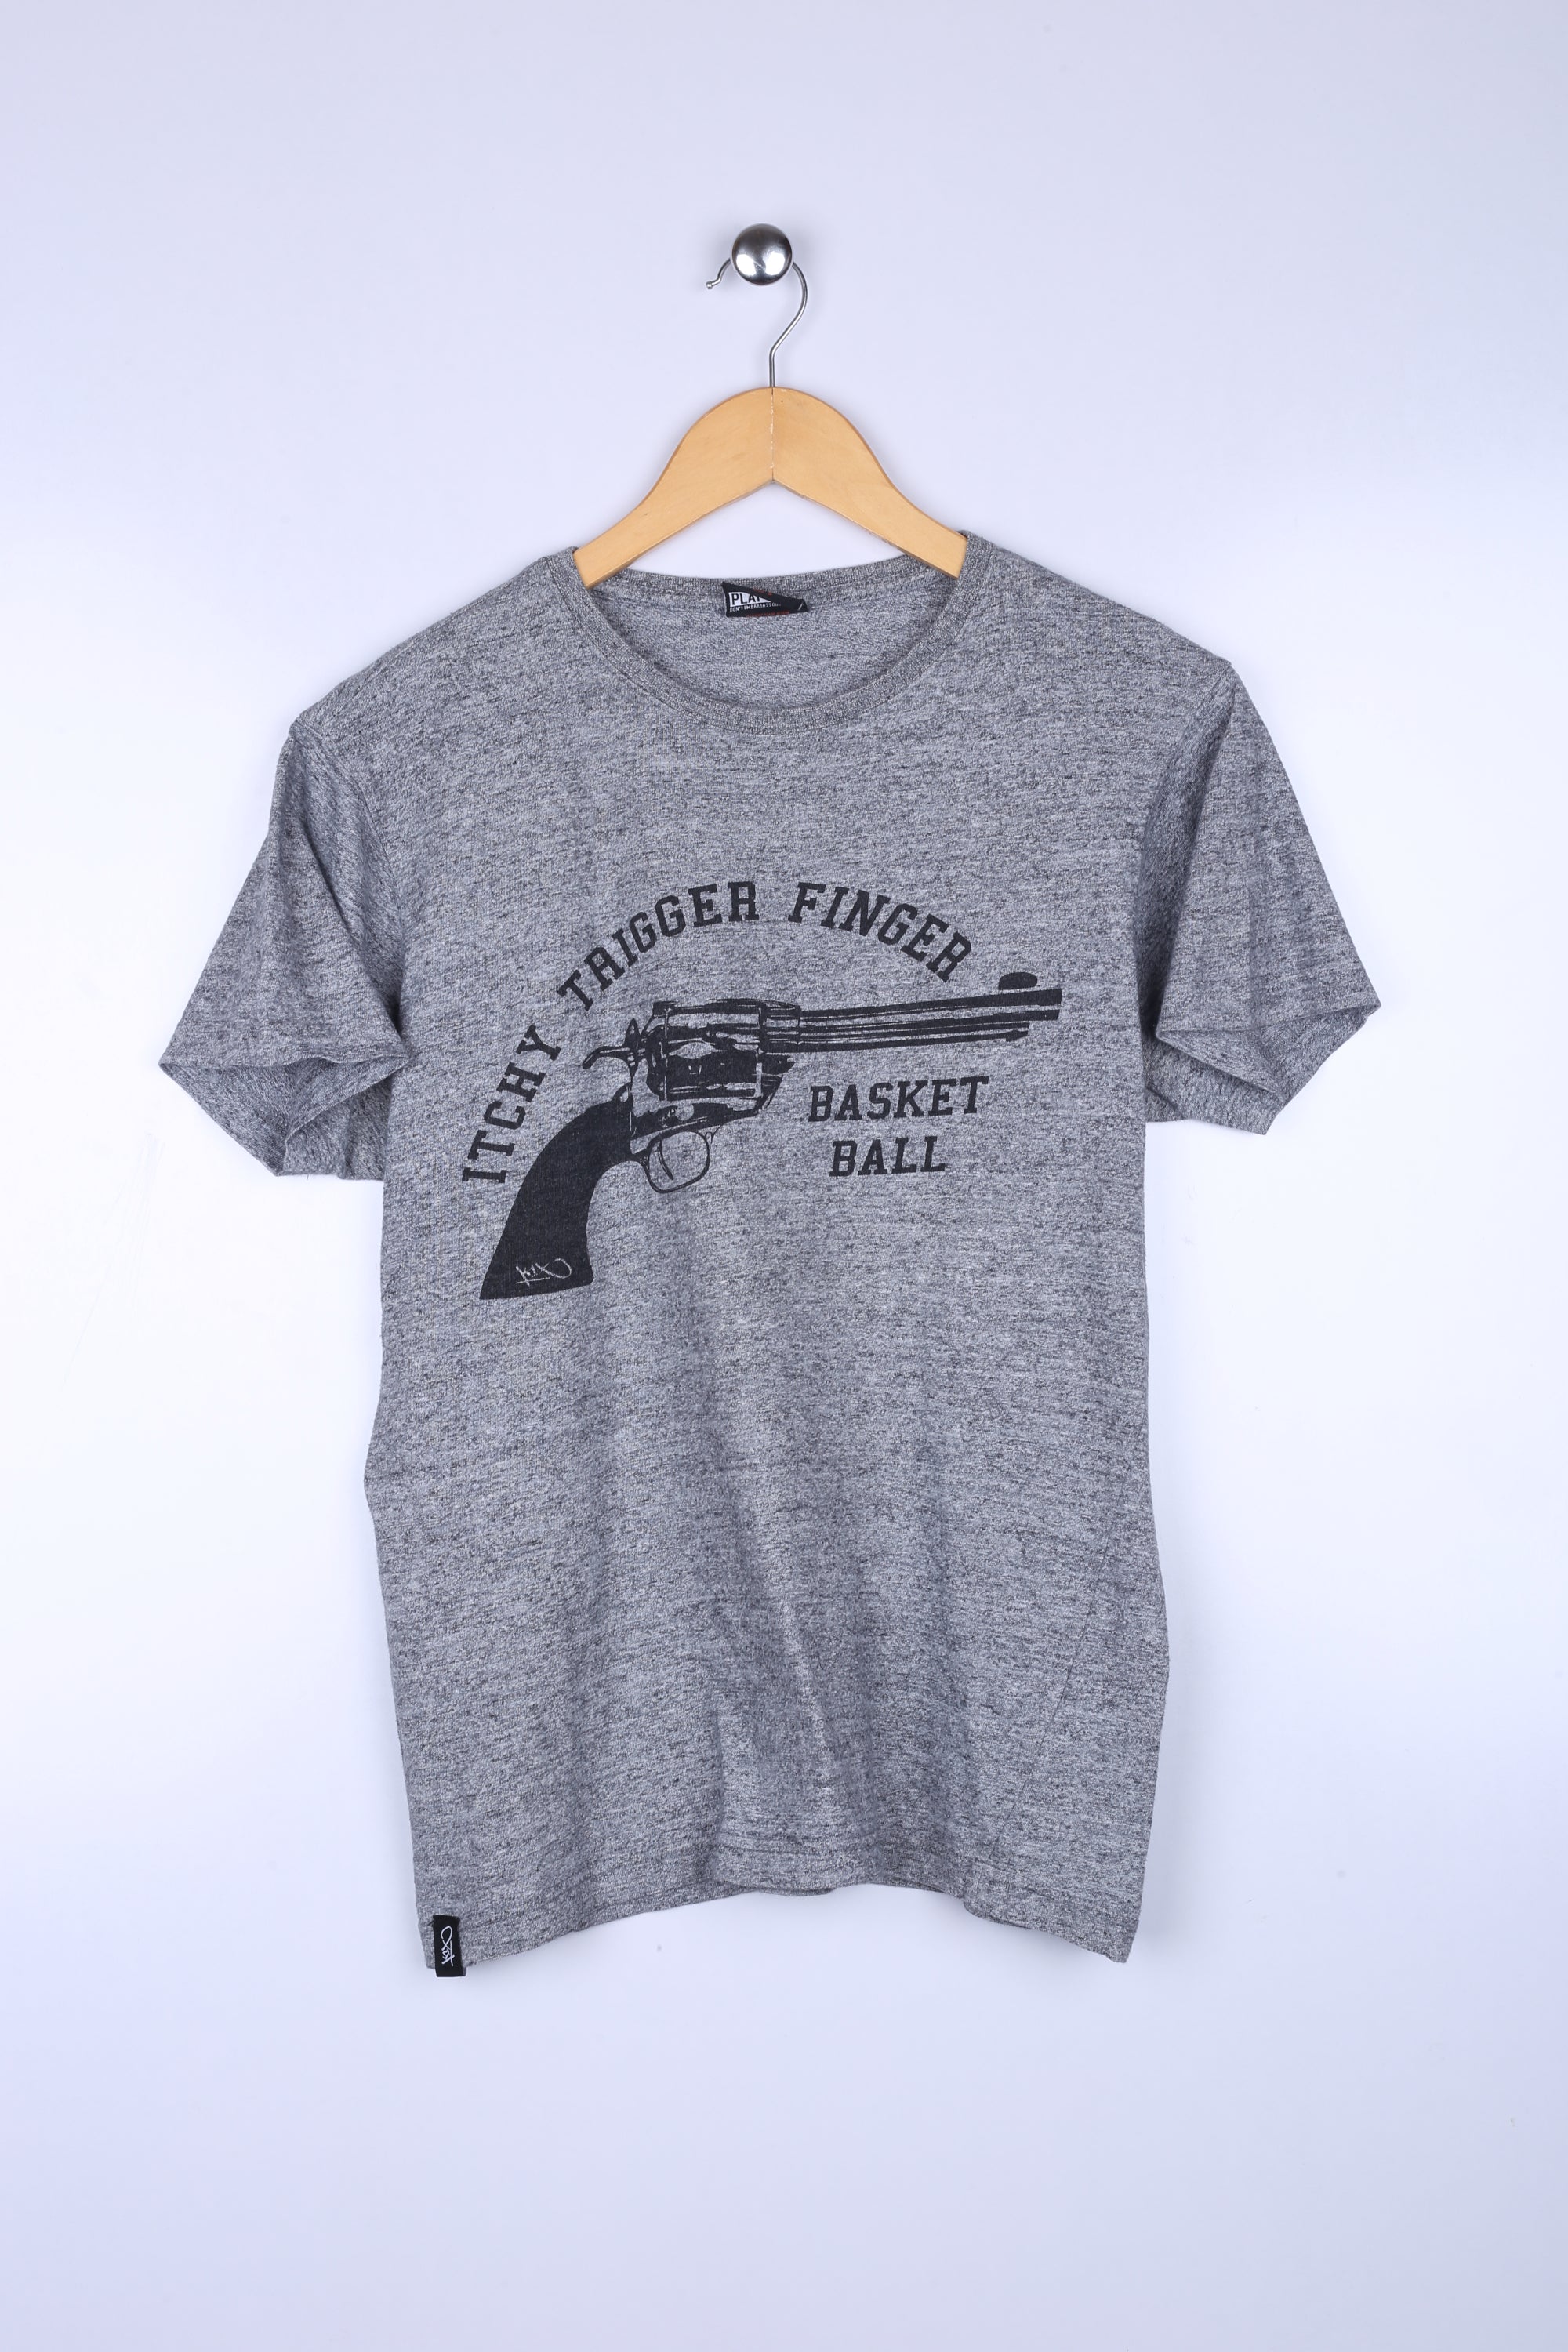 Vintage Trigger Graphic Tee Grey Small